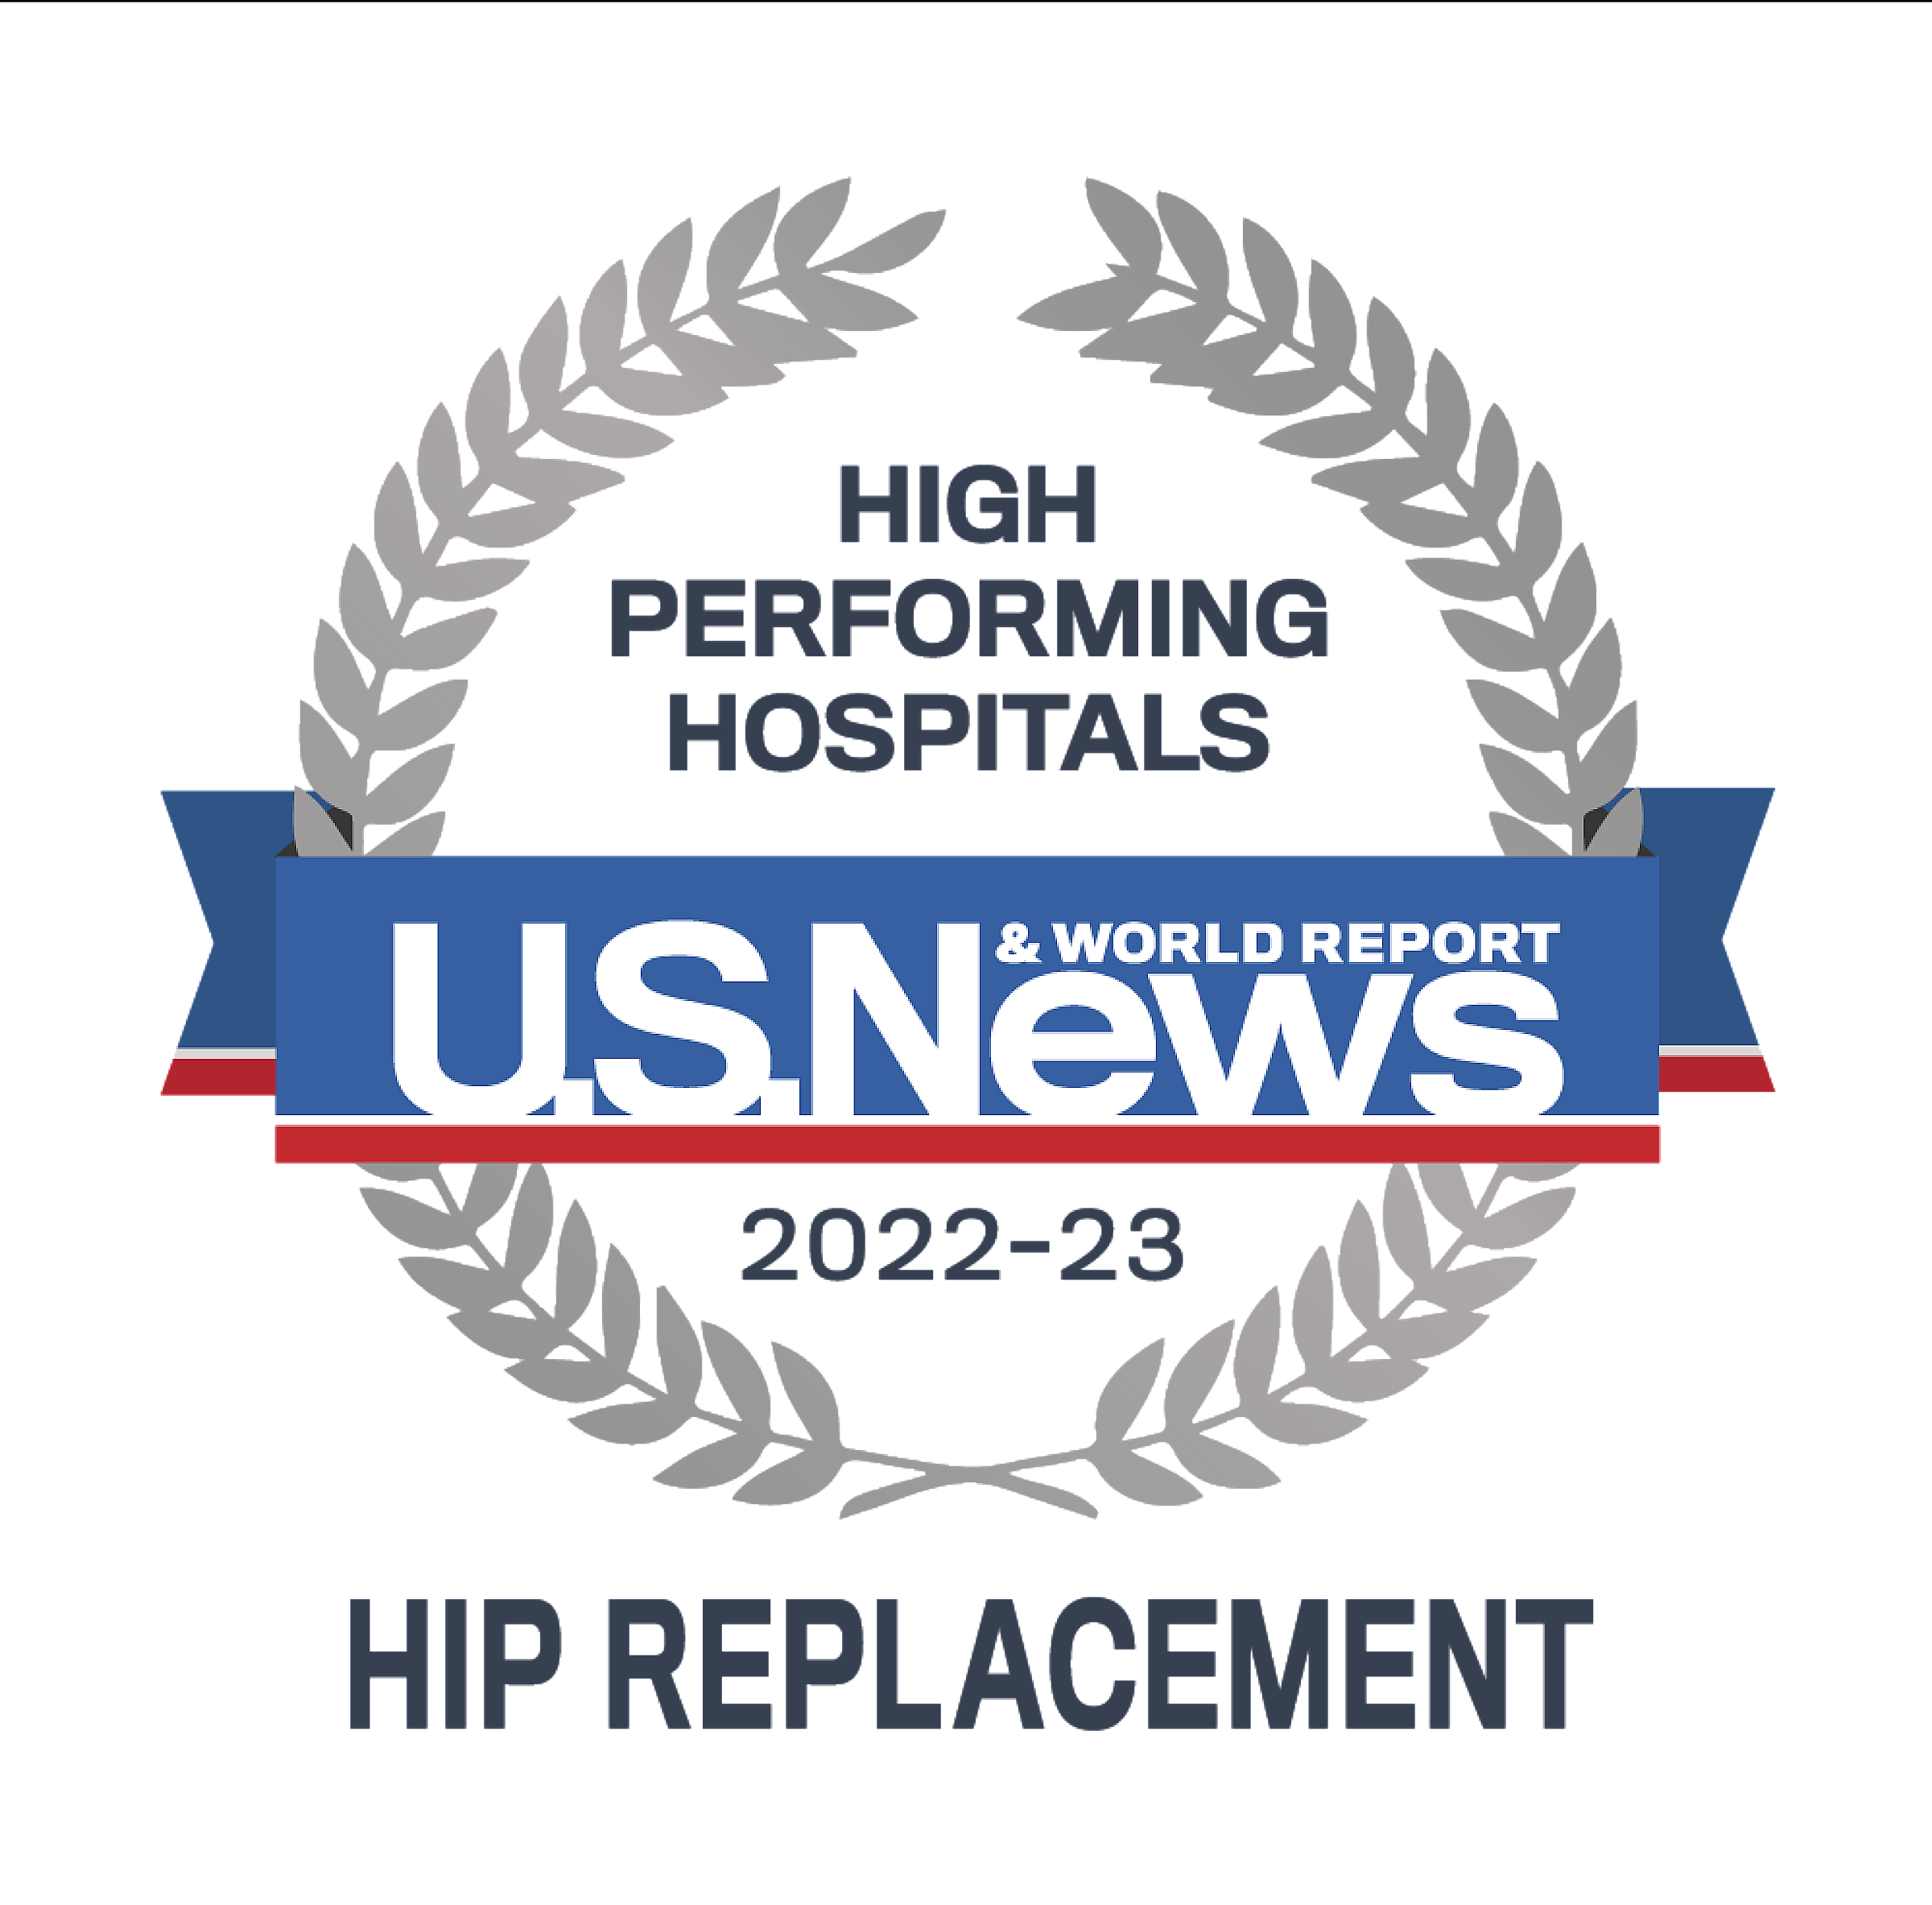 US News & World Report high performing for hip replacement 2022-2023